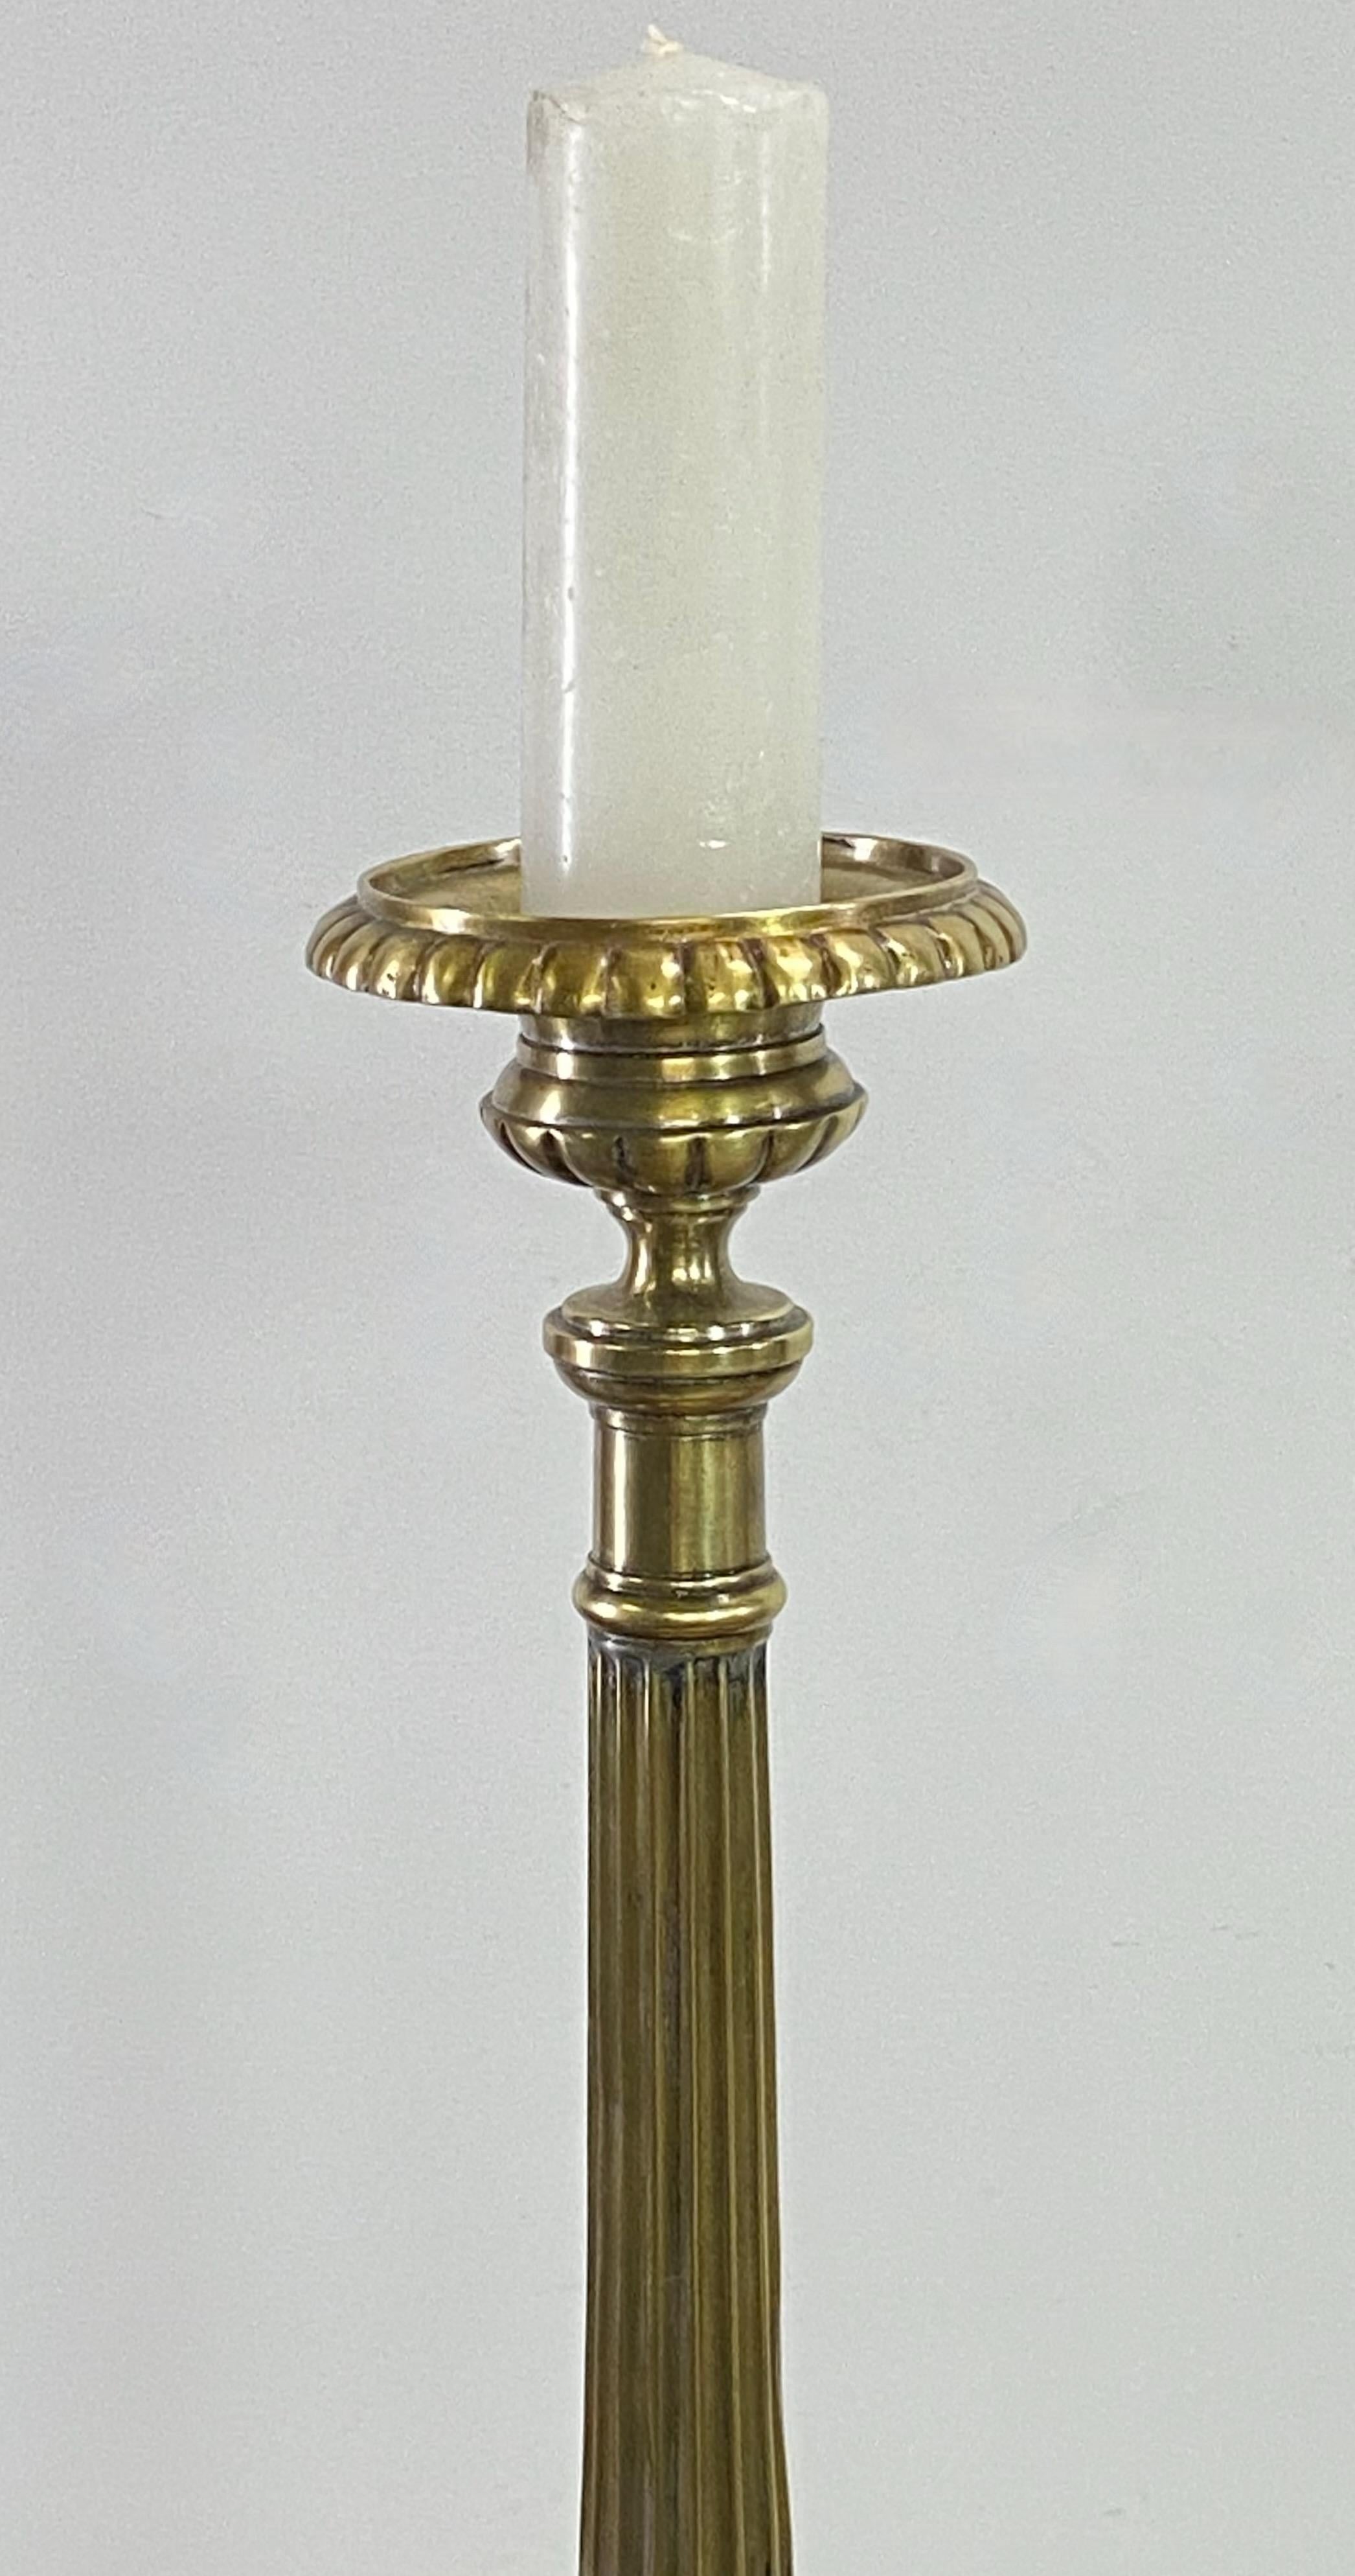 Pair of Early 19th Century European Brass Candlesticks, circa 1840 For Sale 5